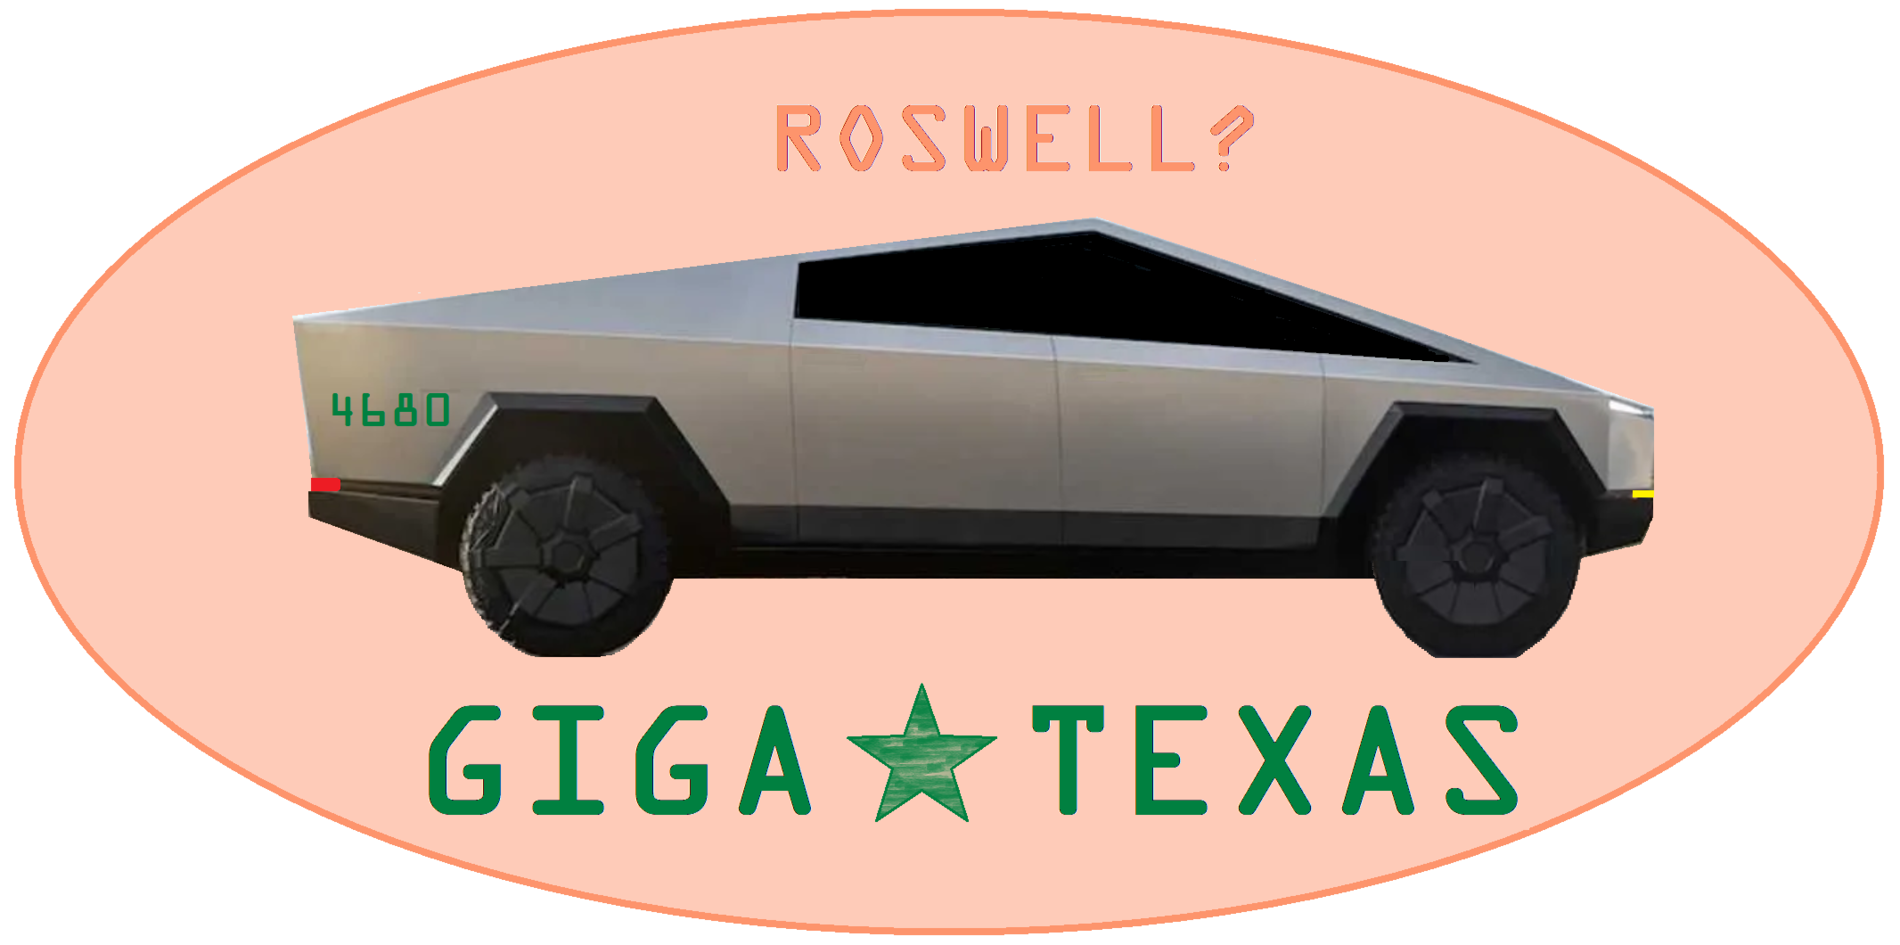 Tesla Cybertruck What do you all think of the minimalist approach to the Cybertruck? cybertruck GIGA TEXAS final 4680